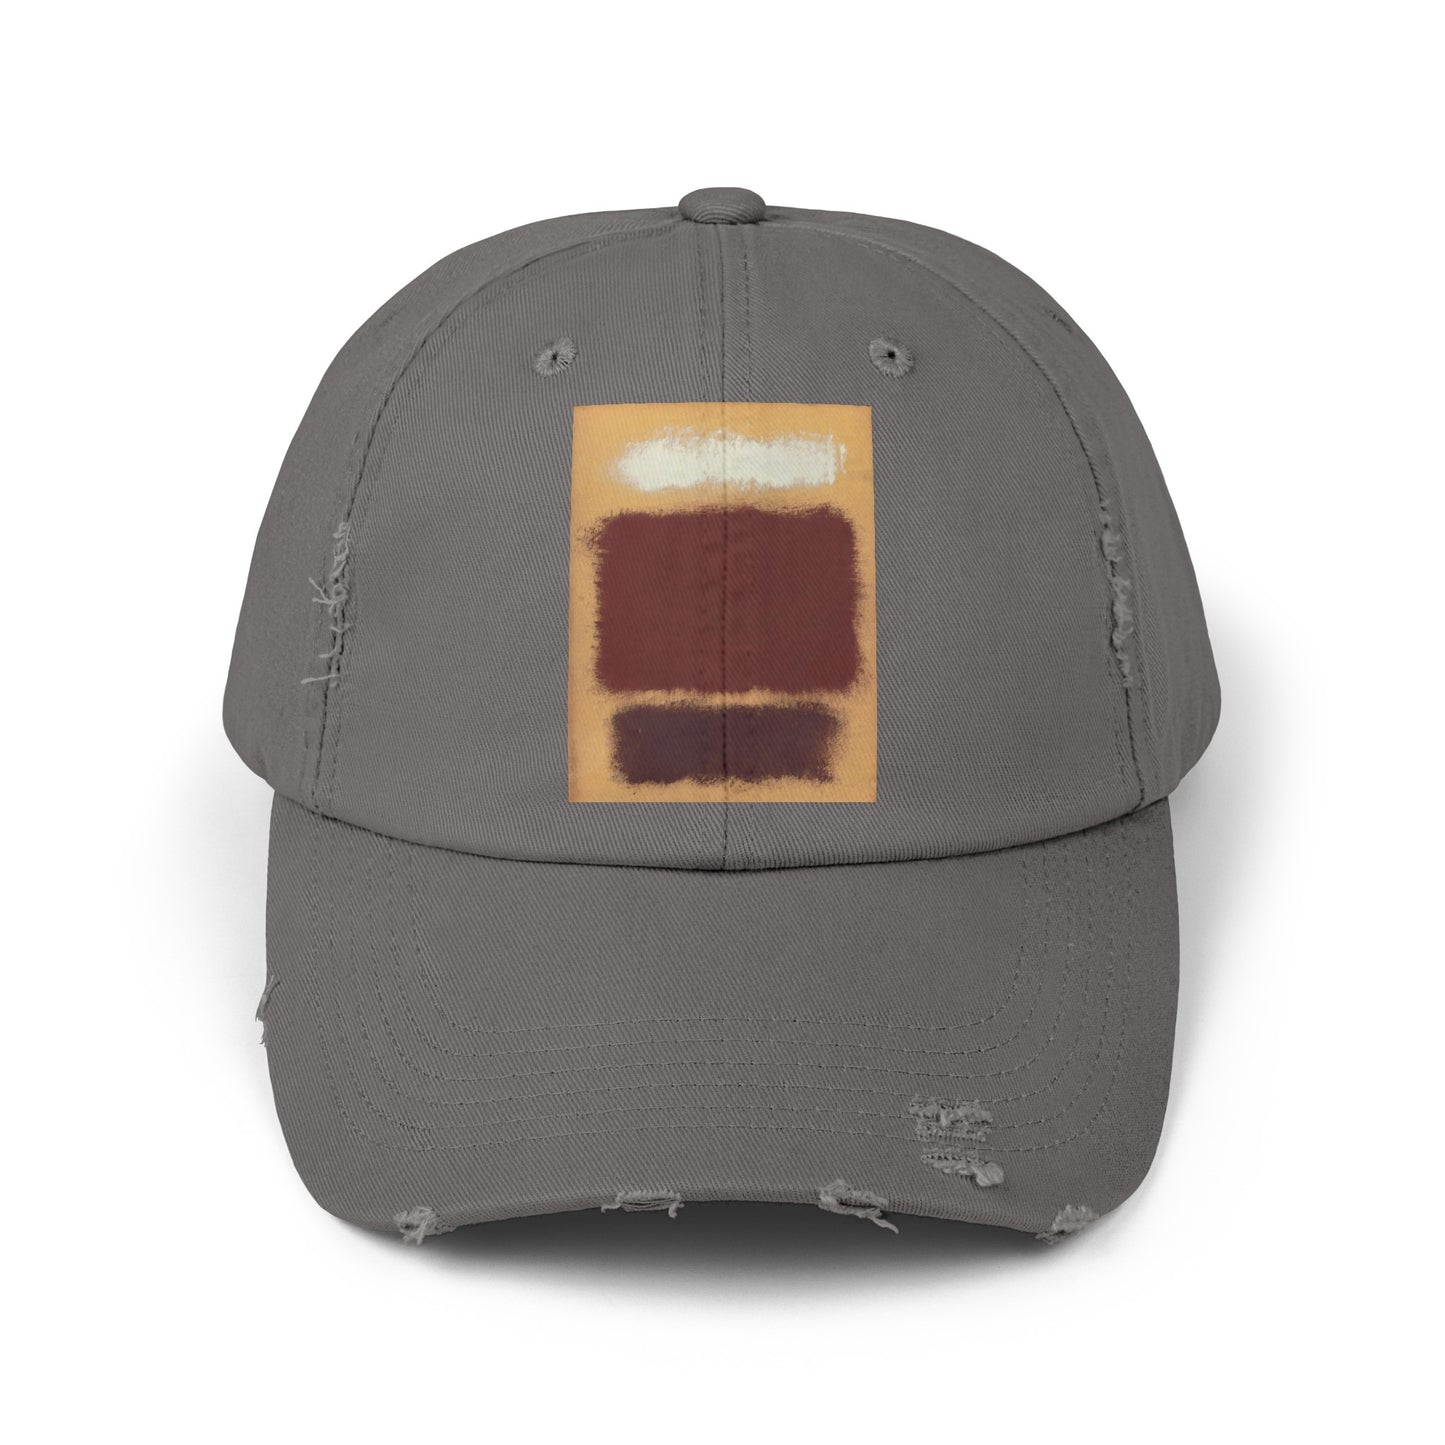 a baseball cap with a painting on it